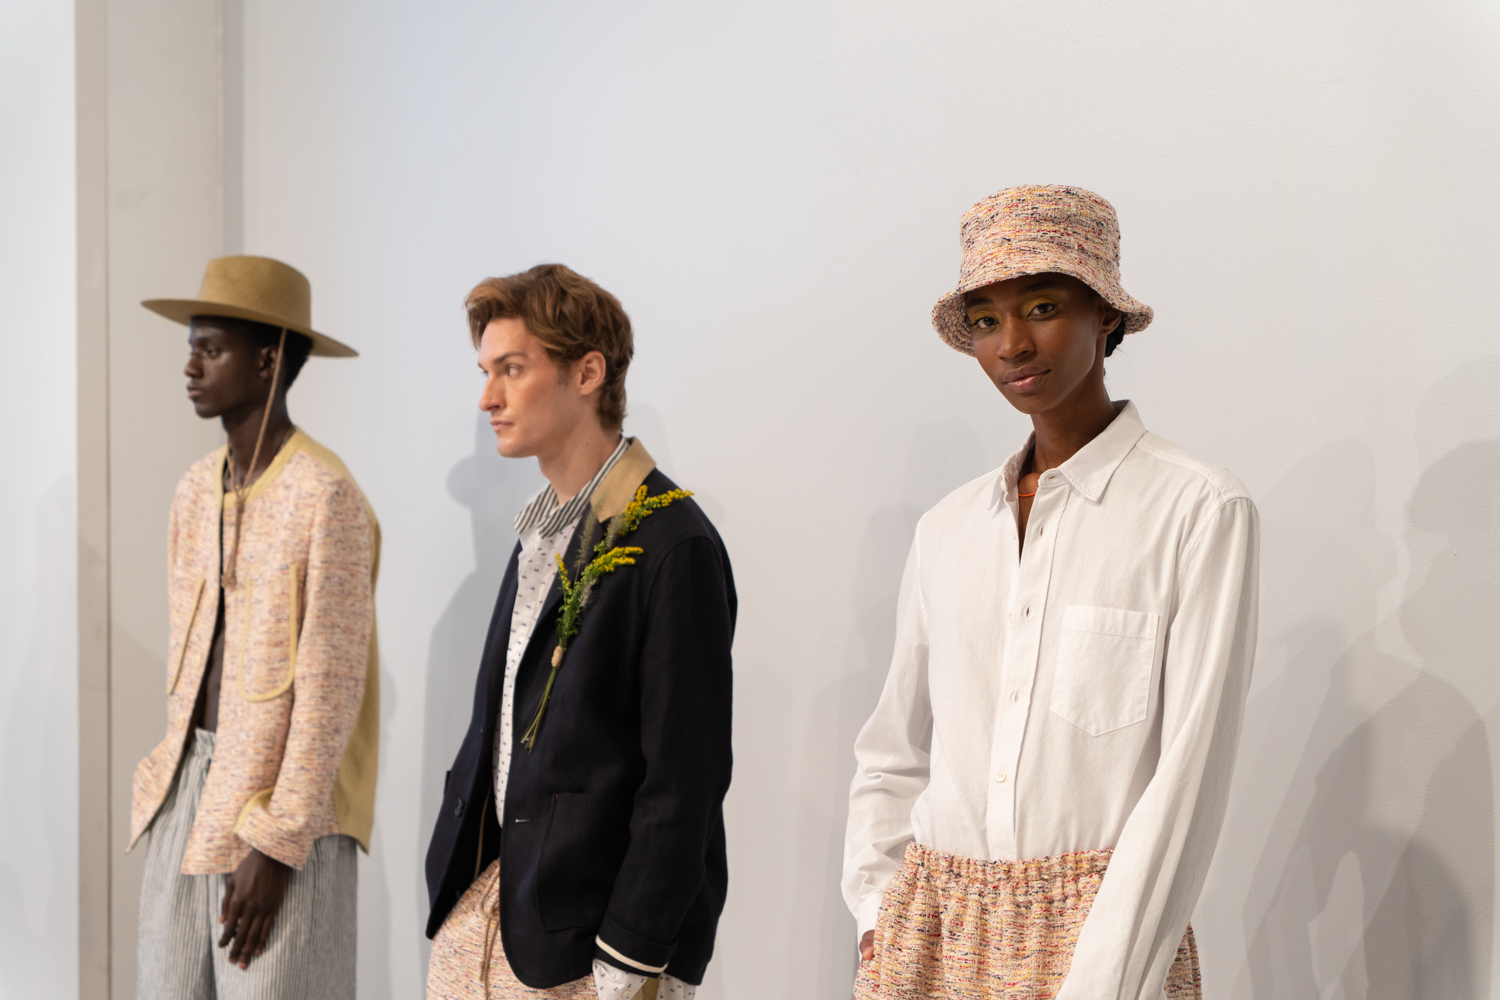 Three models stand in a fashion showroom with white walls. They are wearing clothing from the brand thesalting. The model on the right is looking and smiling at the camera.